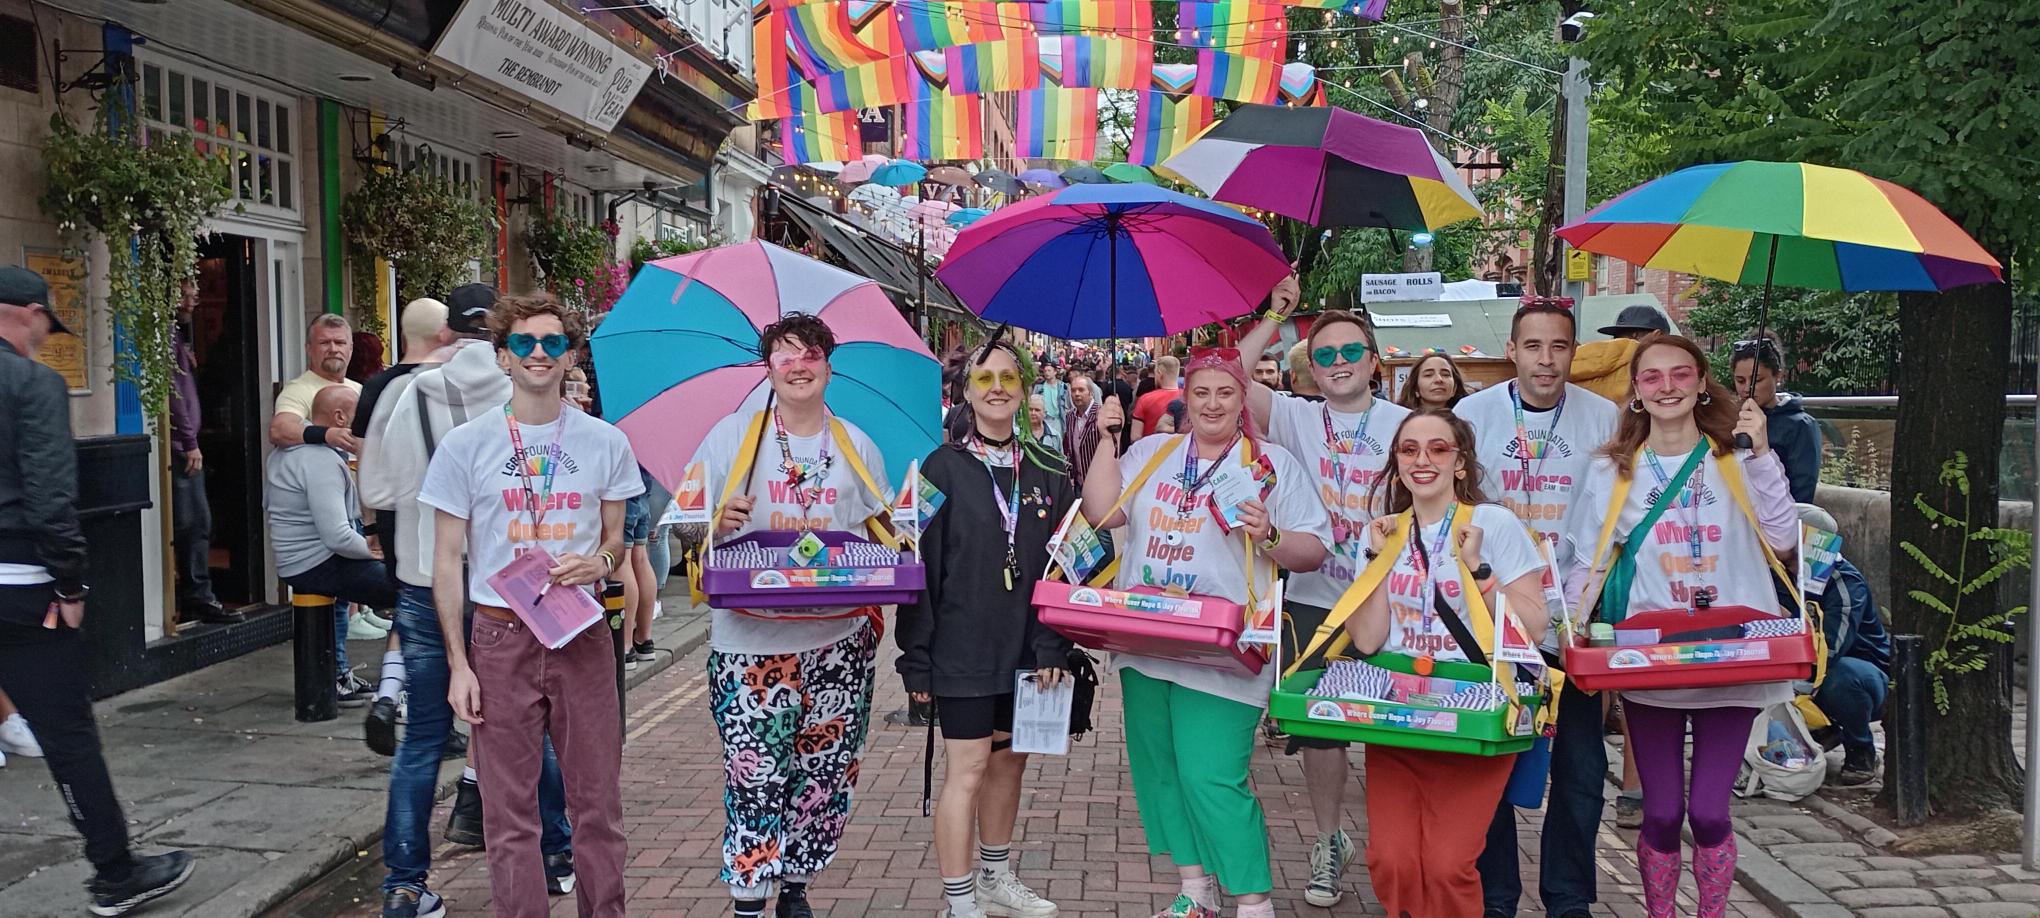 Our sexual health team and their volunteers stand on canal street with their freebies including condoms and lube using their ice cream tray mobile outreach, they're all holding identity based LGBTQ+ flag umbrellas.